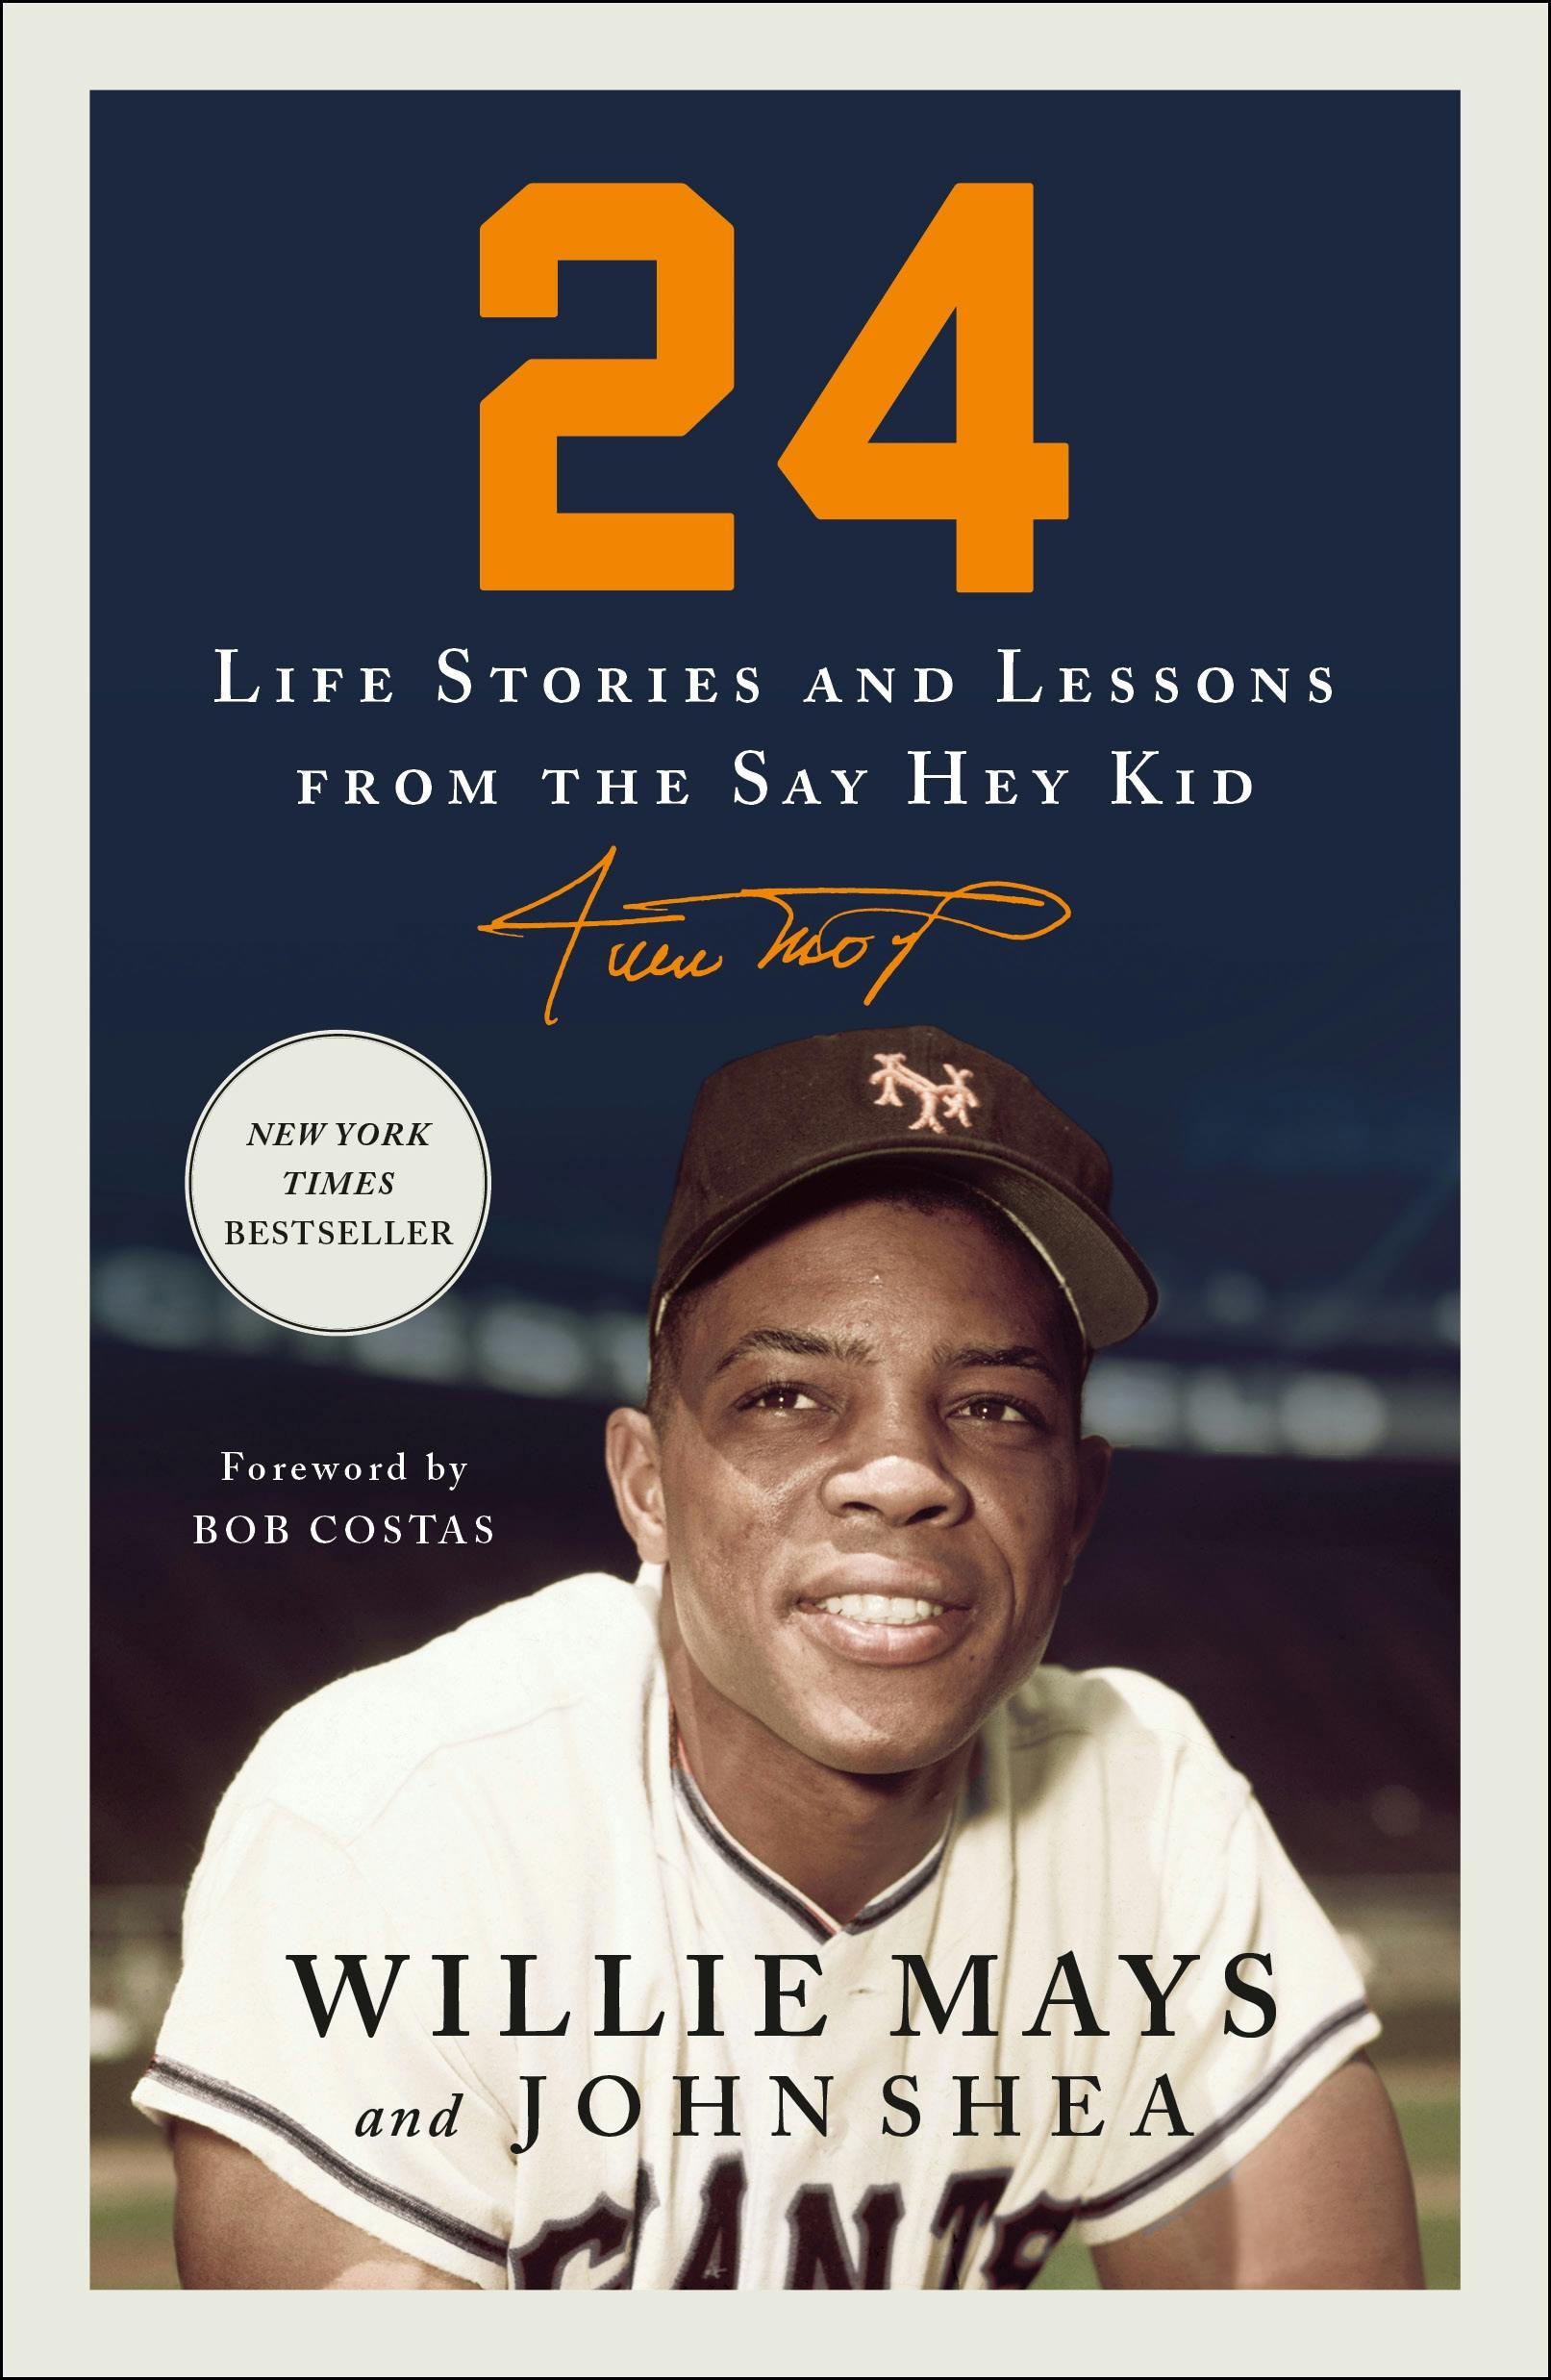 Book reveals how faith sustained Jackie Robinson as he shattered